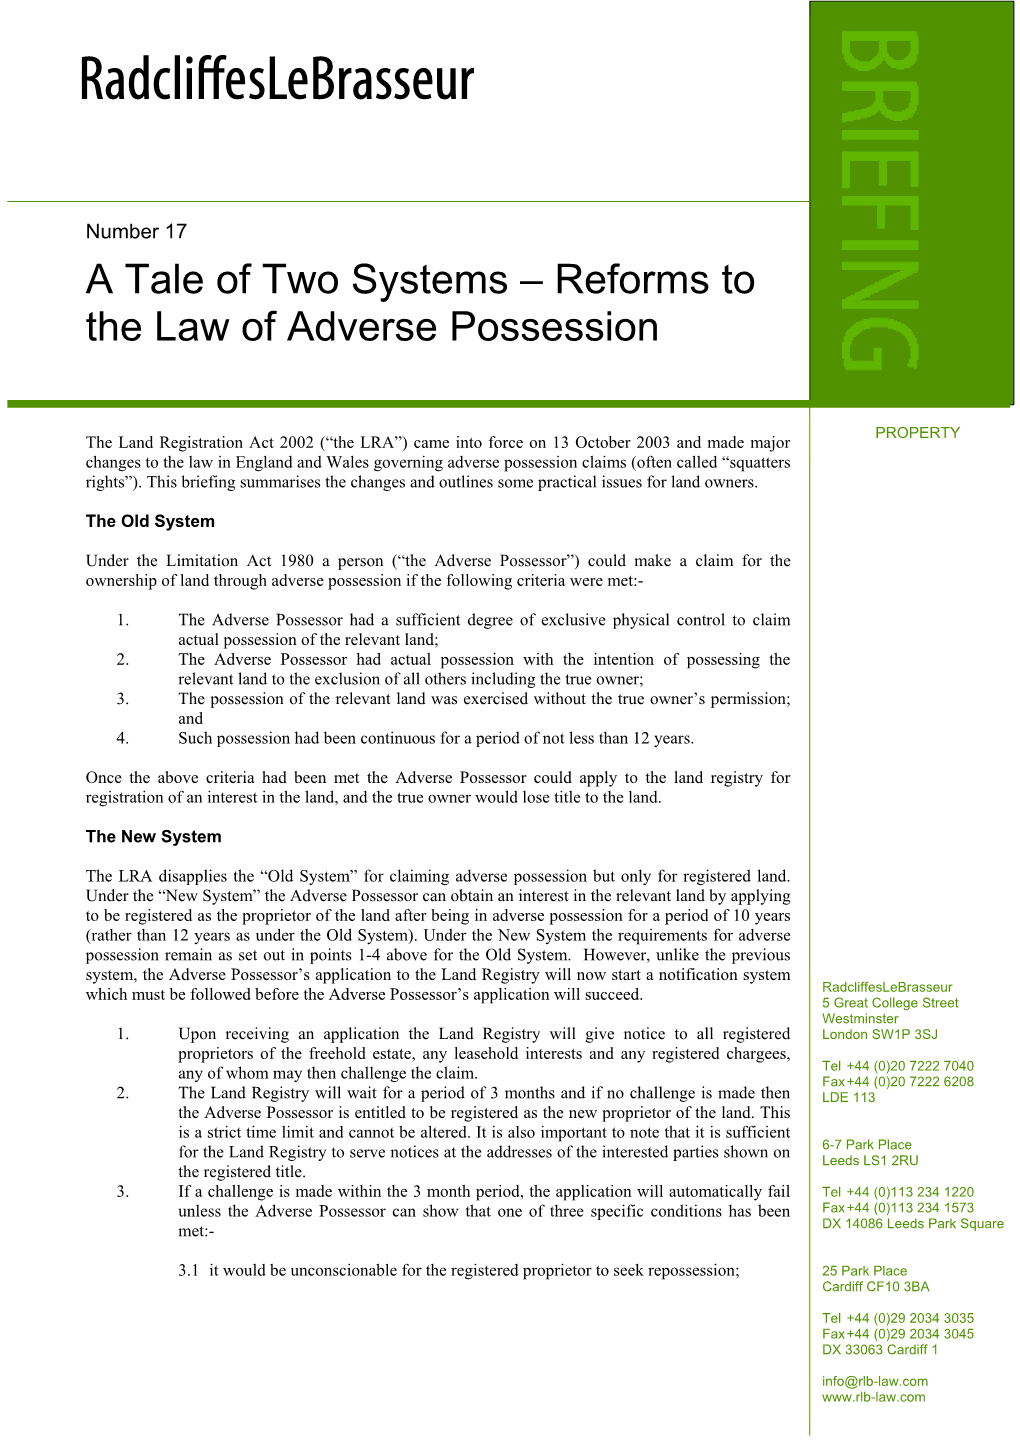 A Tale of Two Systems – Reforms to the Law of Adverse Possession